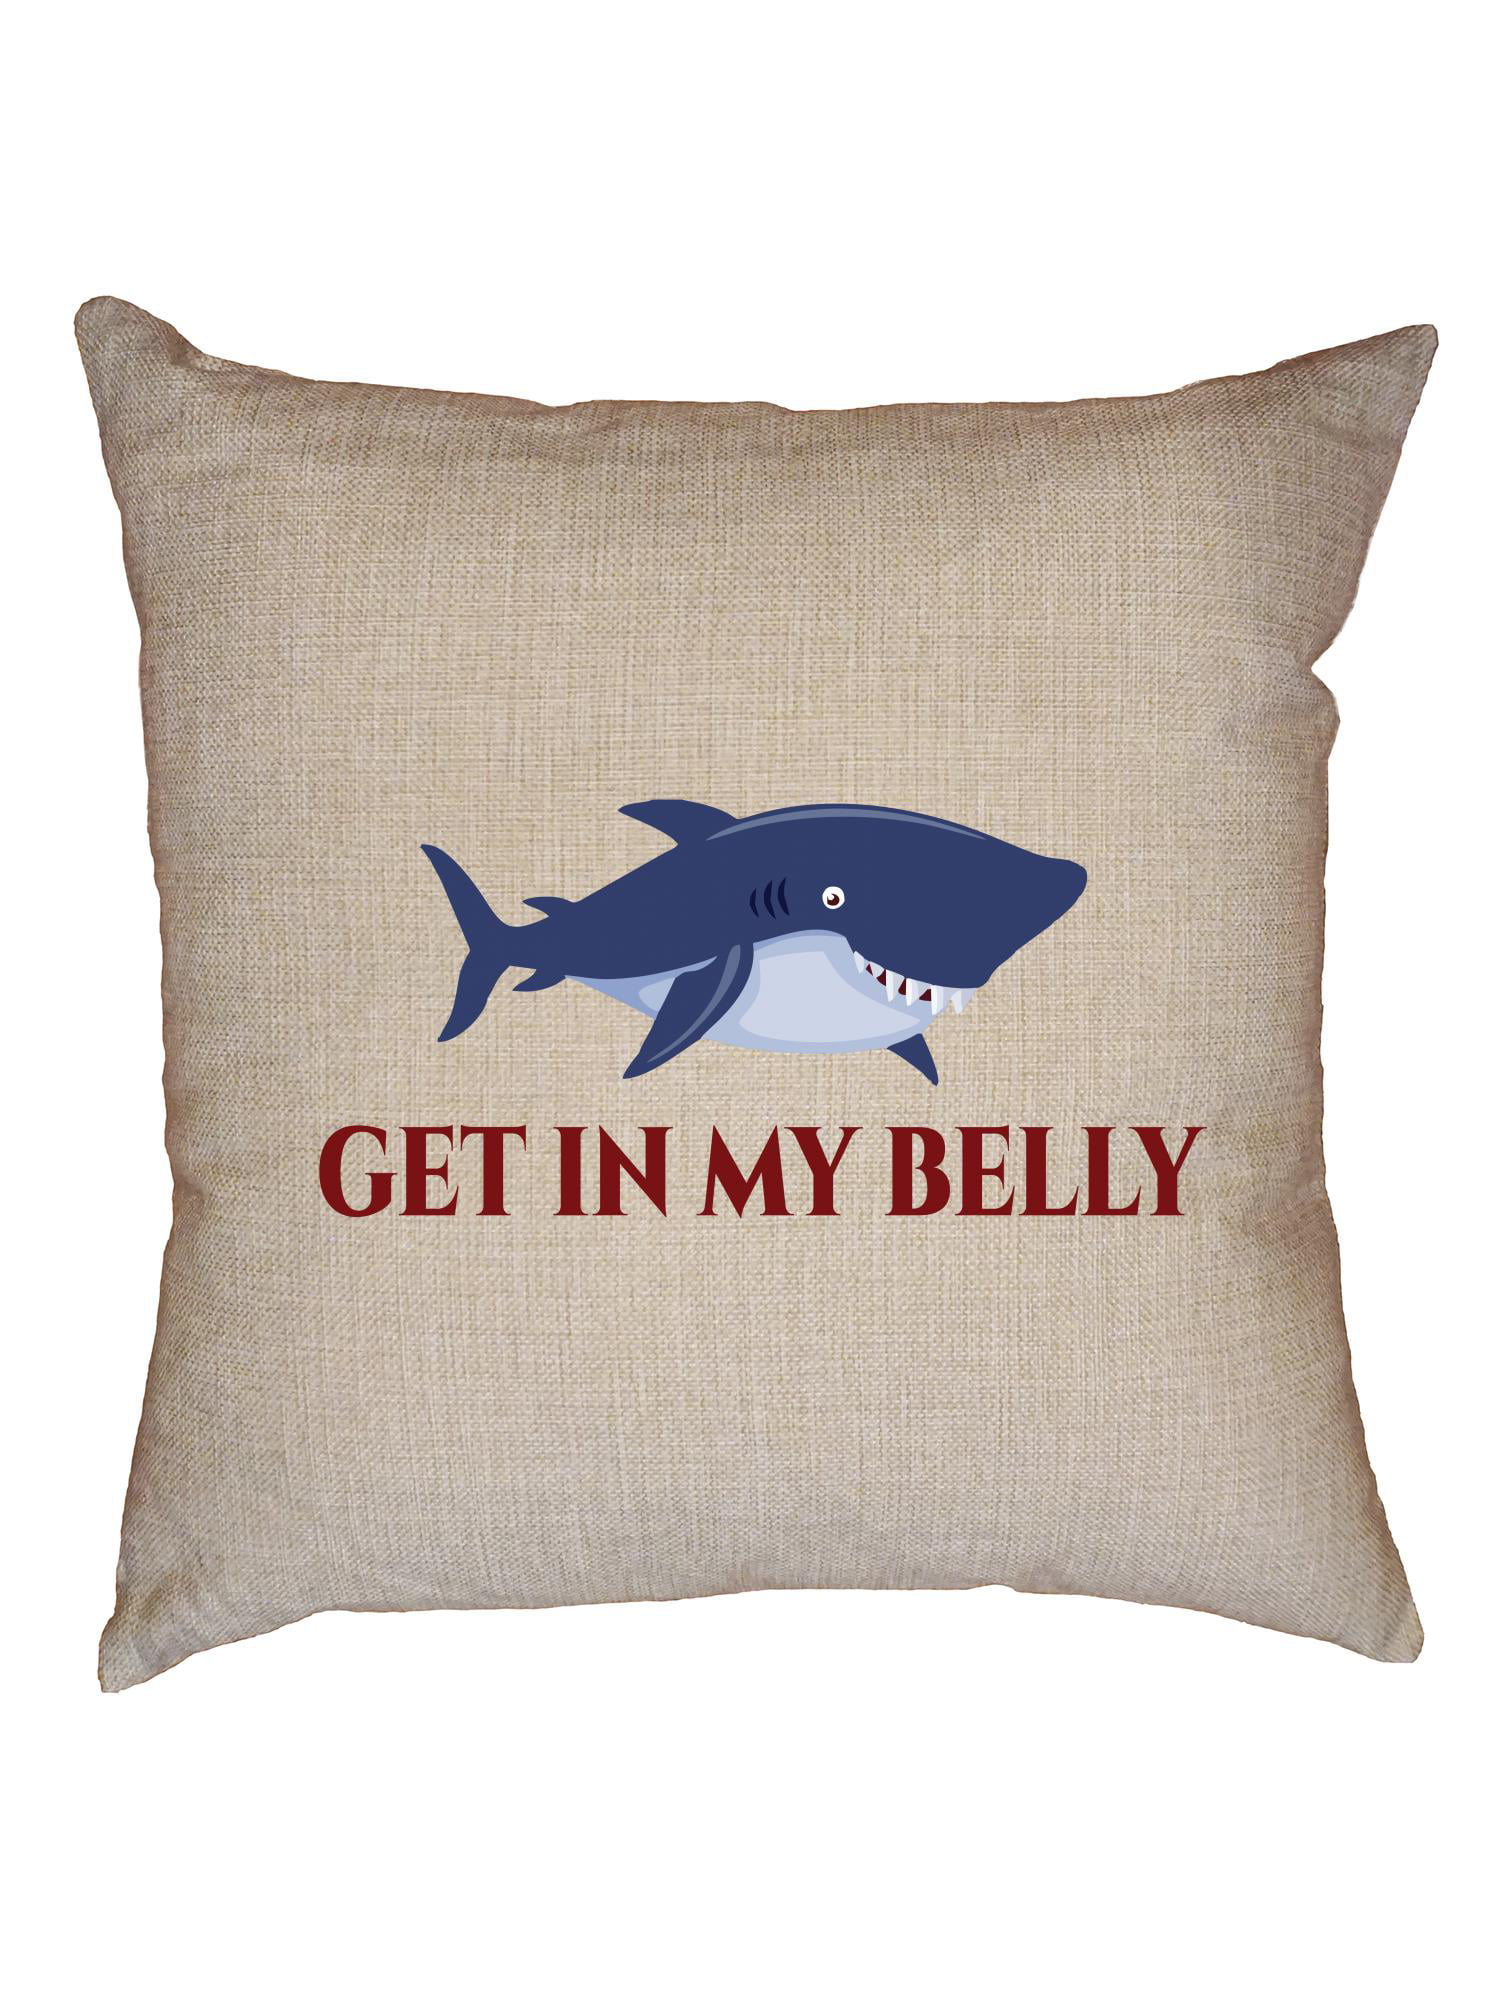 16x16 inch Home Decor White Throw Pillow Angry Shark Design Non Fade Print Decorative Sofa Cushion Stuffed with Hypoallergenic Poly Filling